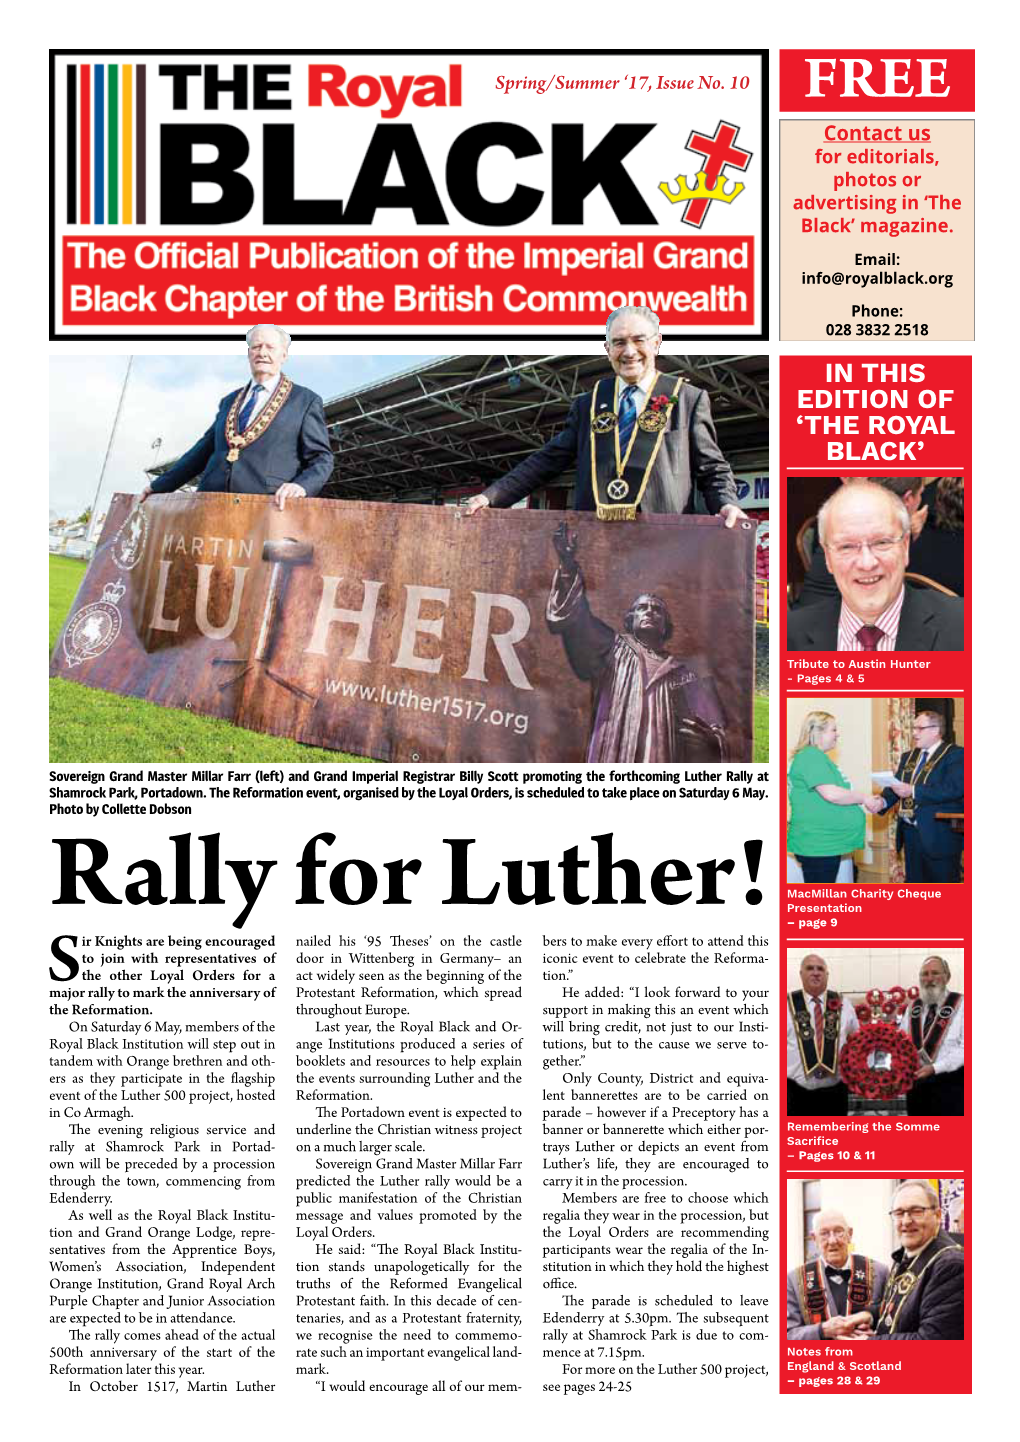 Rally for Luther!